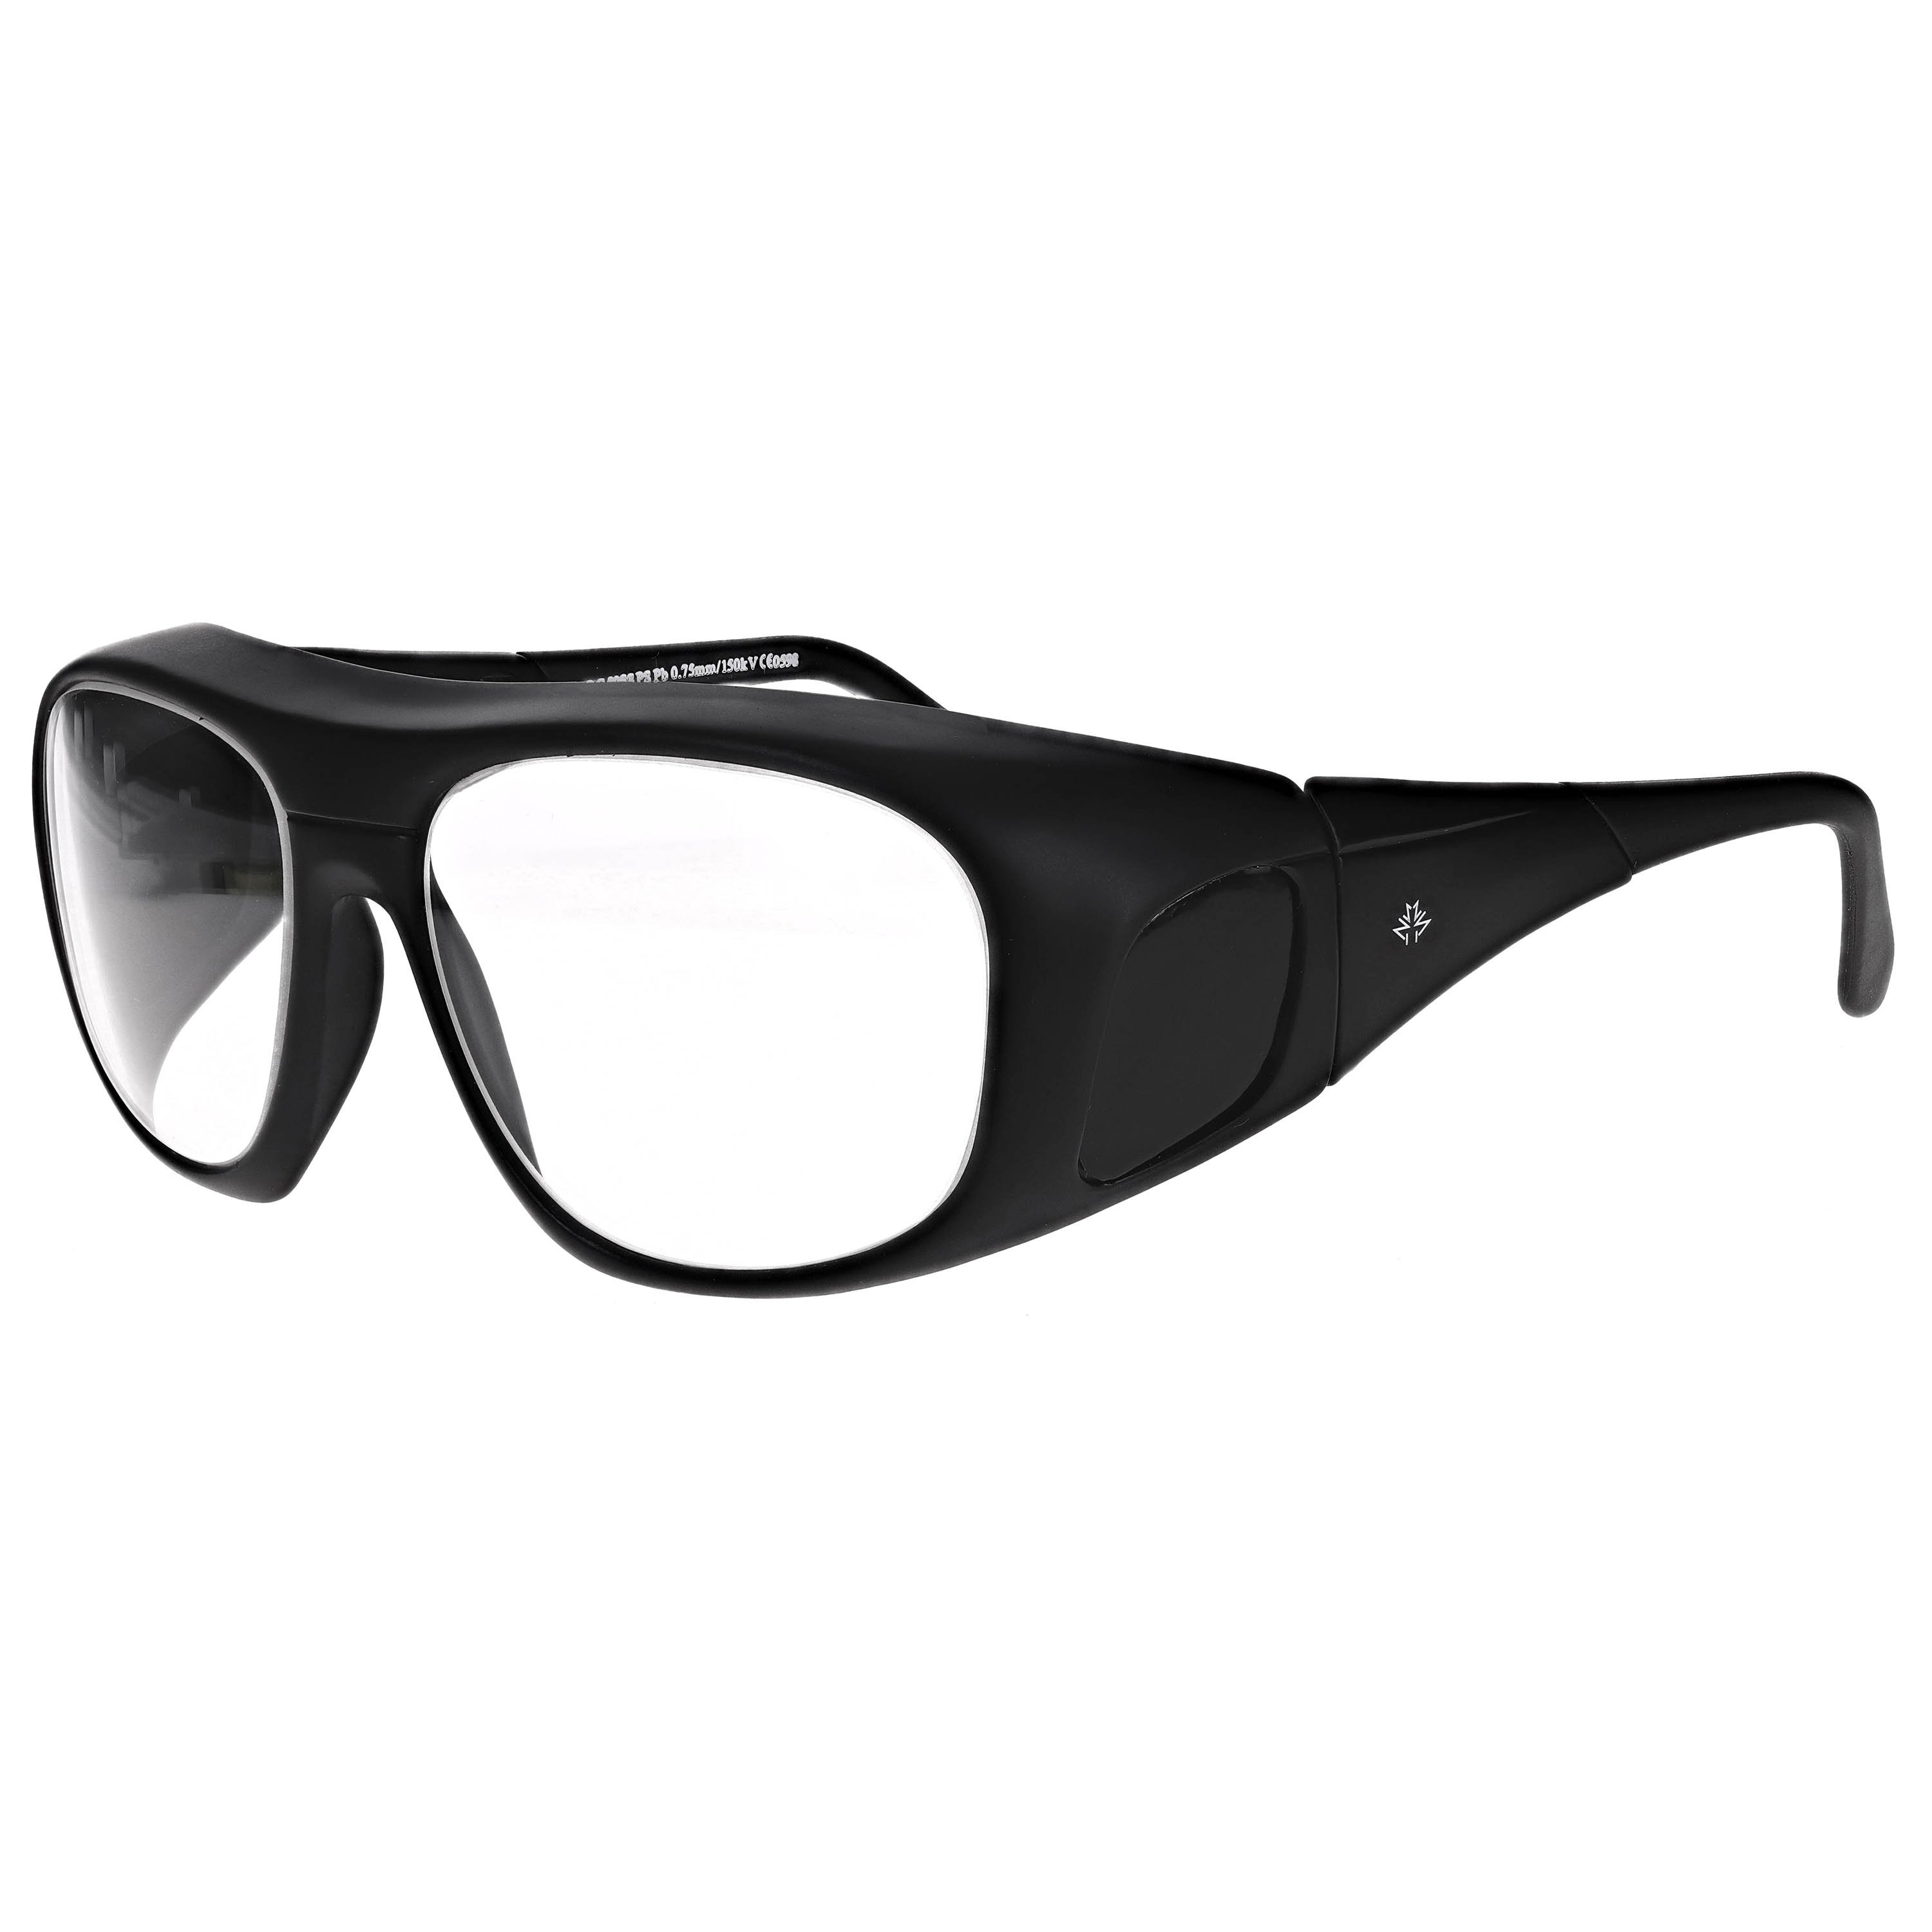 RG-33 Fit Over Lead Glasses